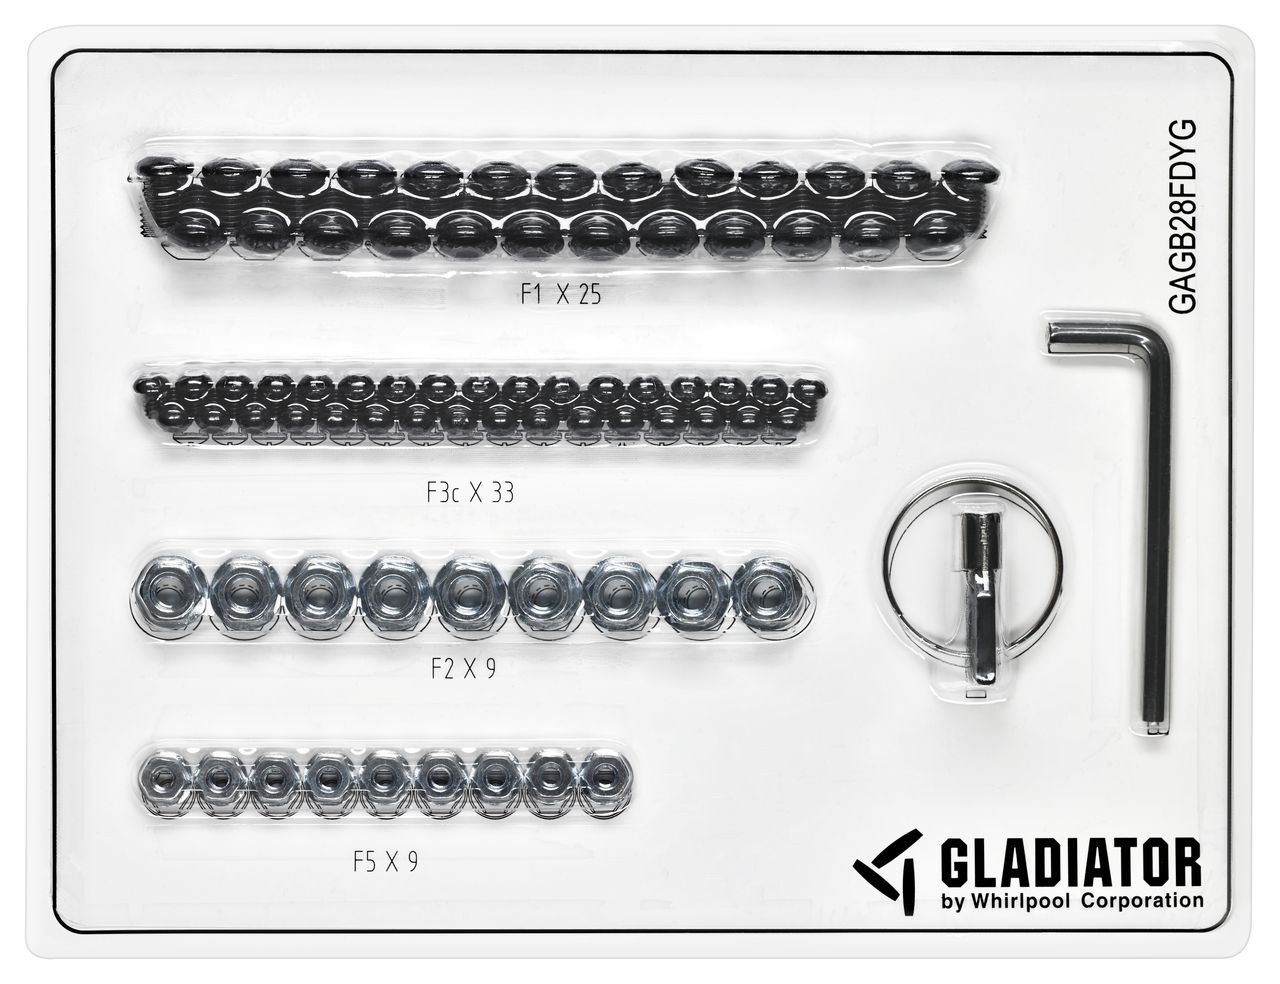 Ready-to-Assemble Extra Large GearBox – Gladiator